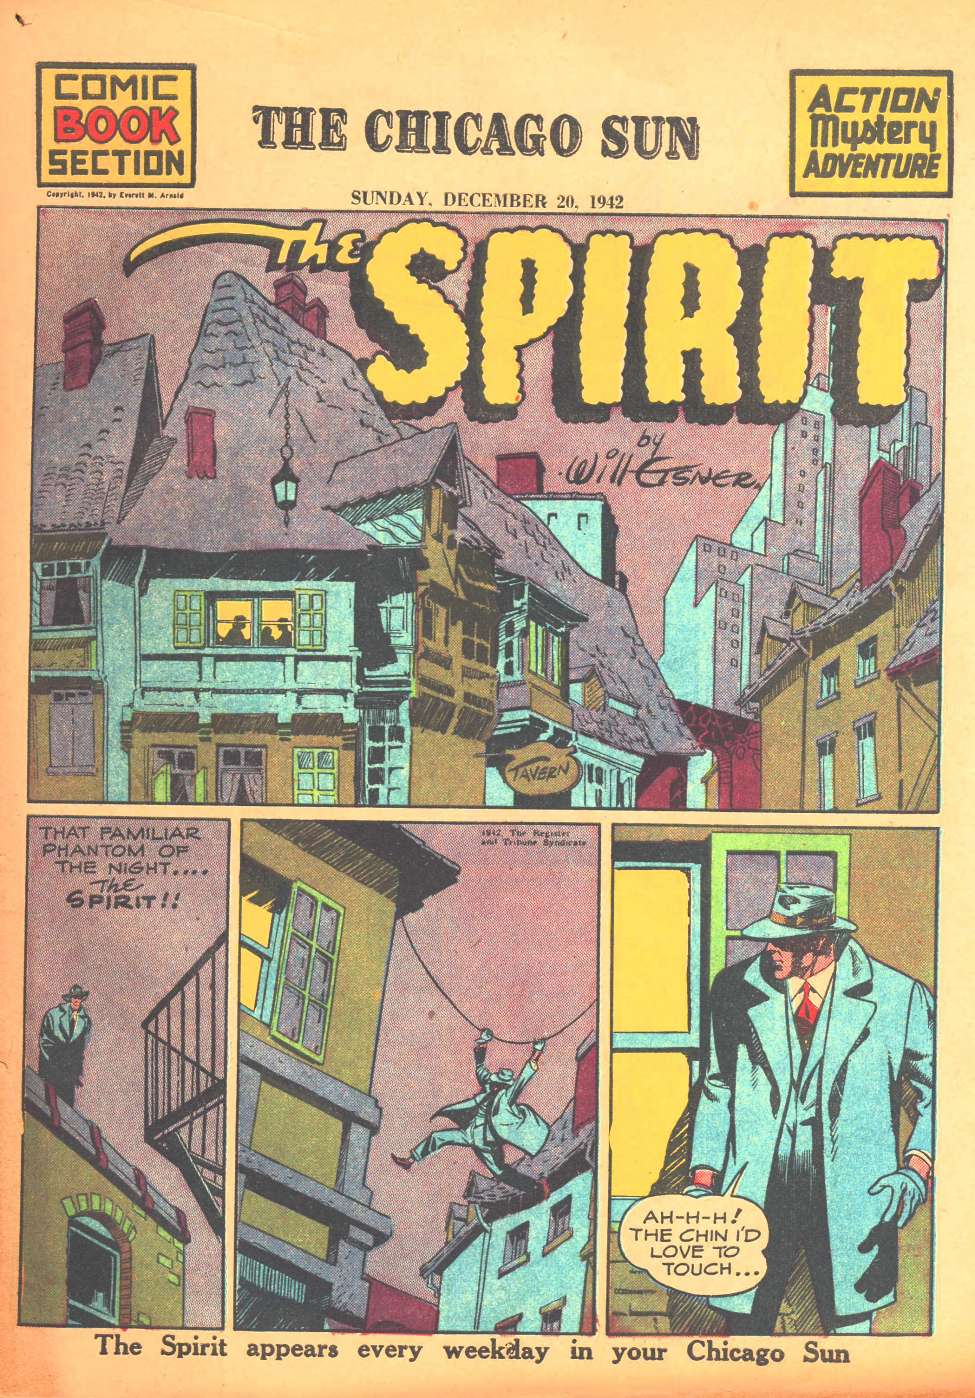 Comic Book Cover For The Spirit (1942-12-20) - Chicago Sun